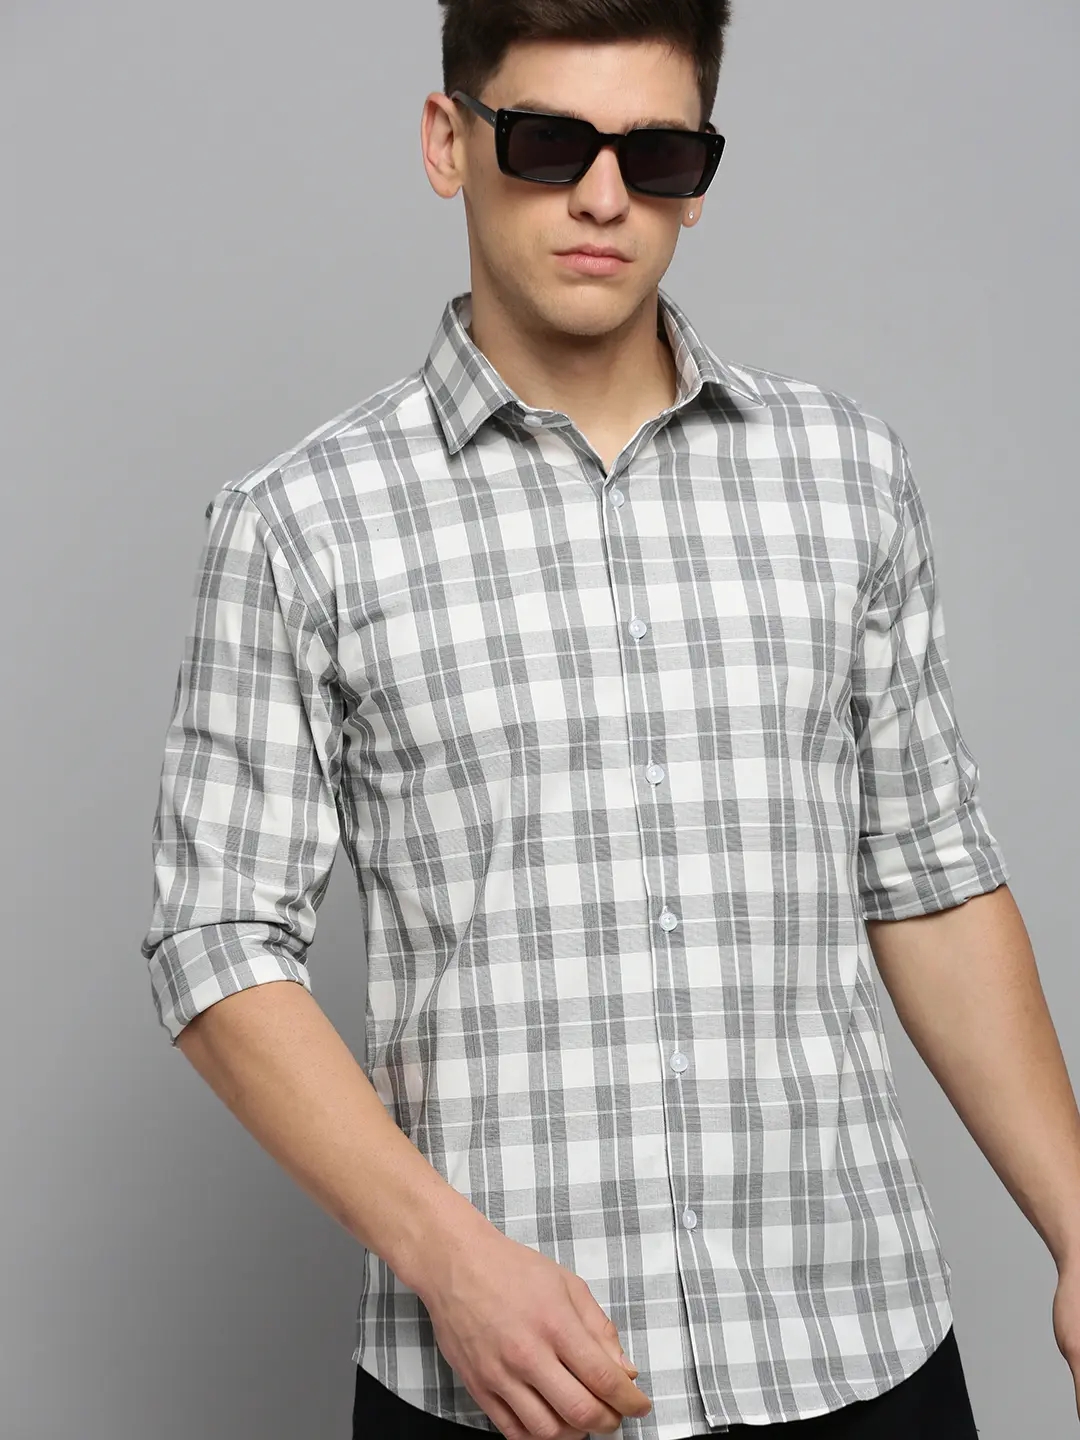 SHOWOFF Men's Spread Collar Checked White Classic Shirt